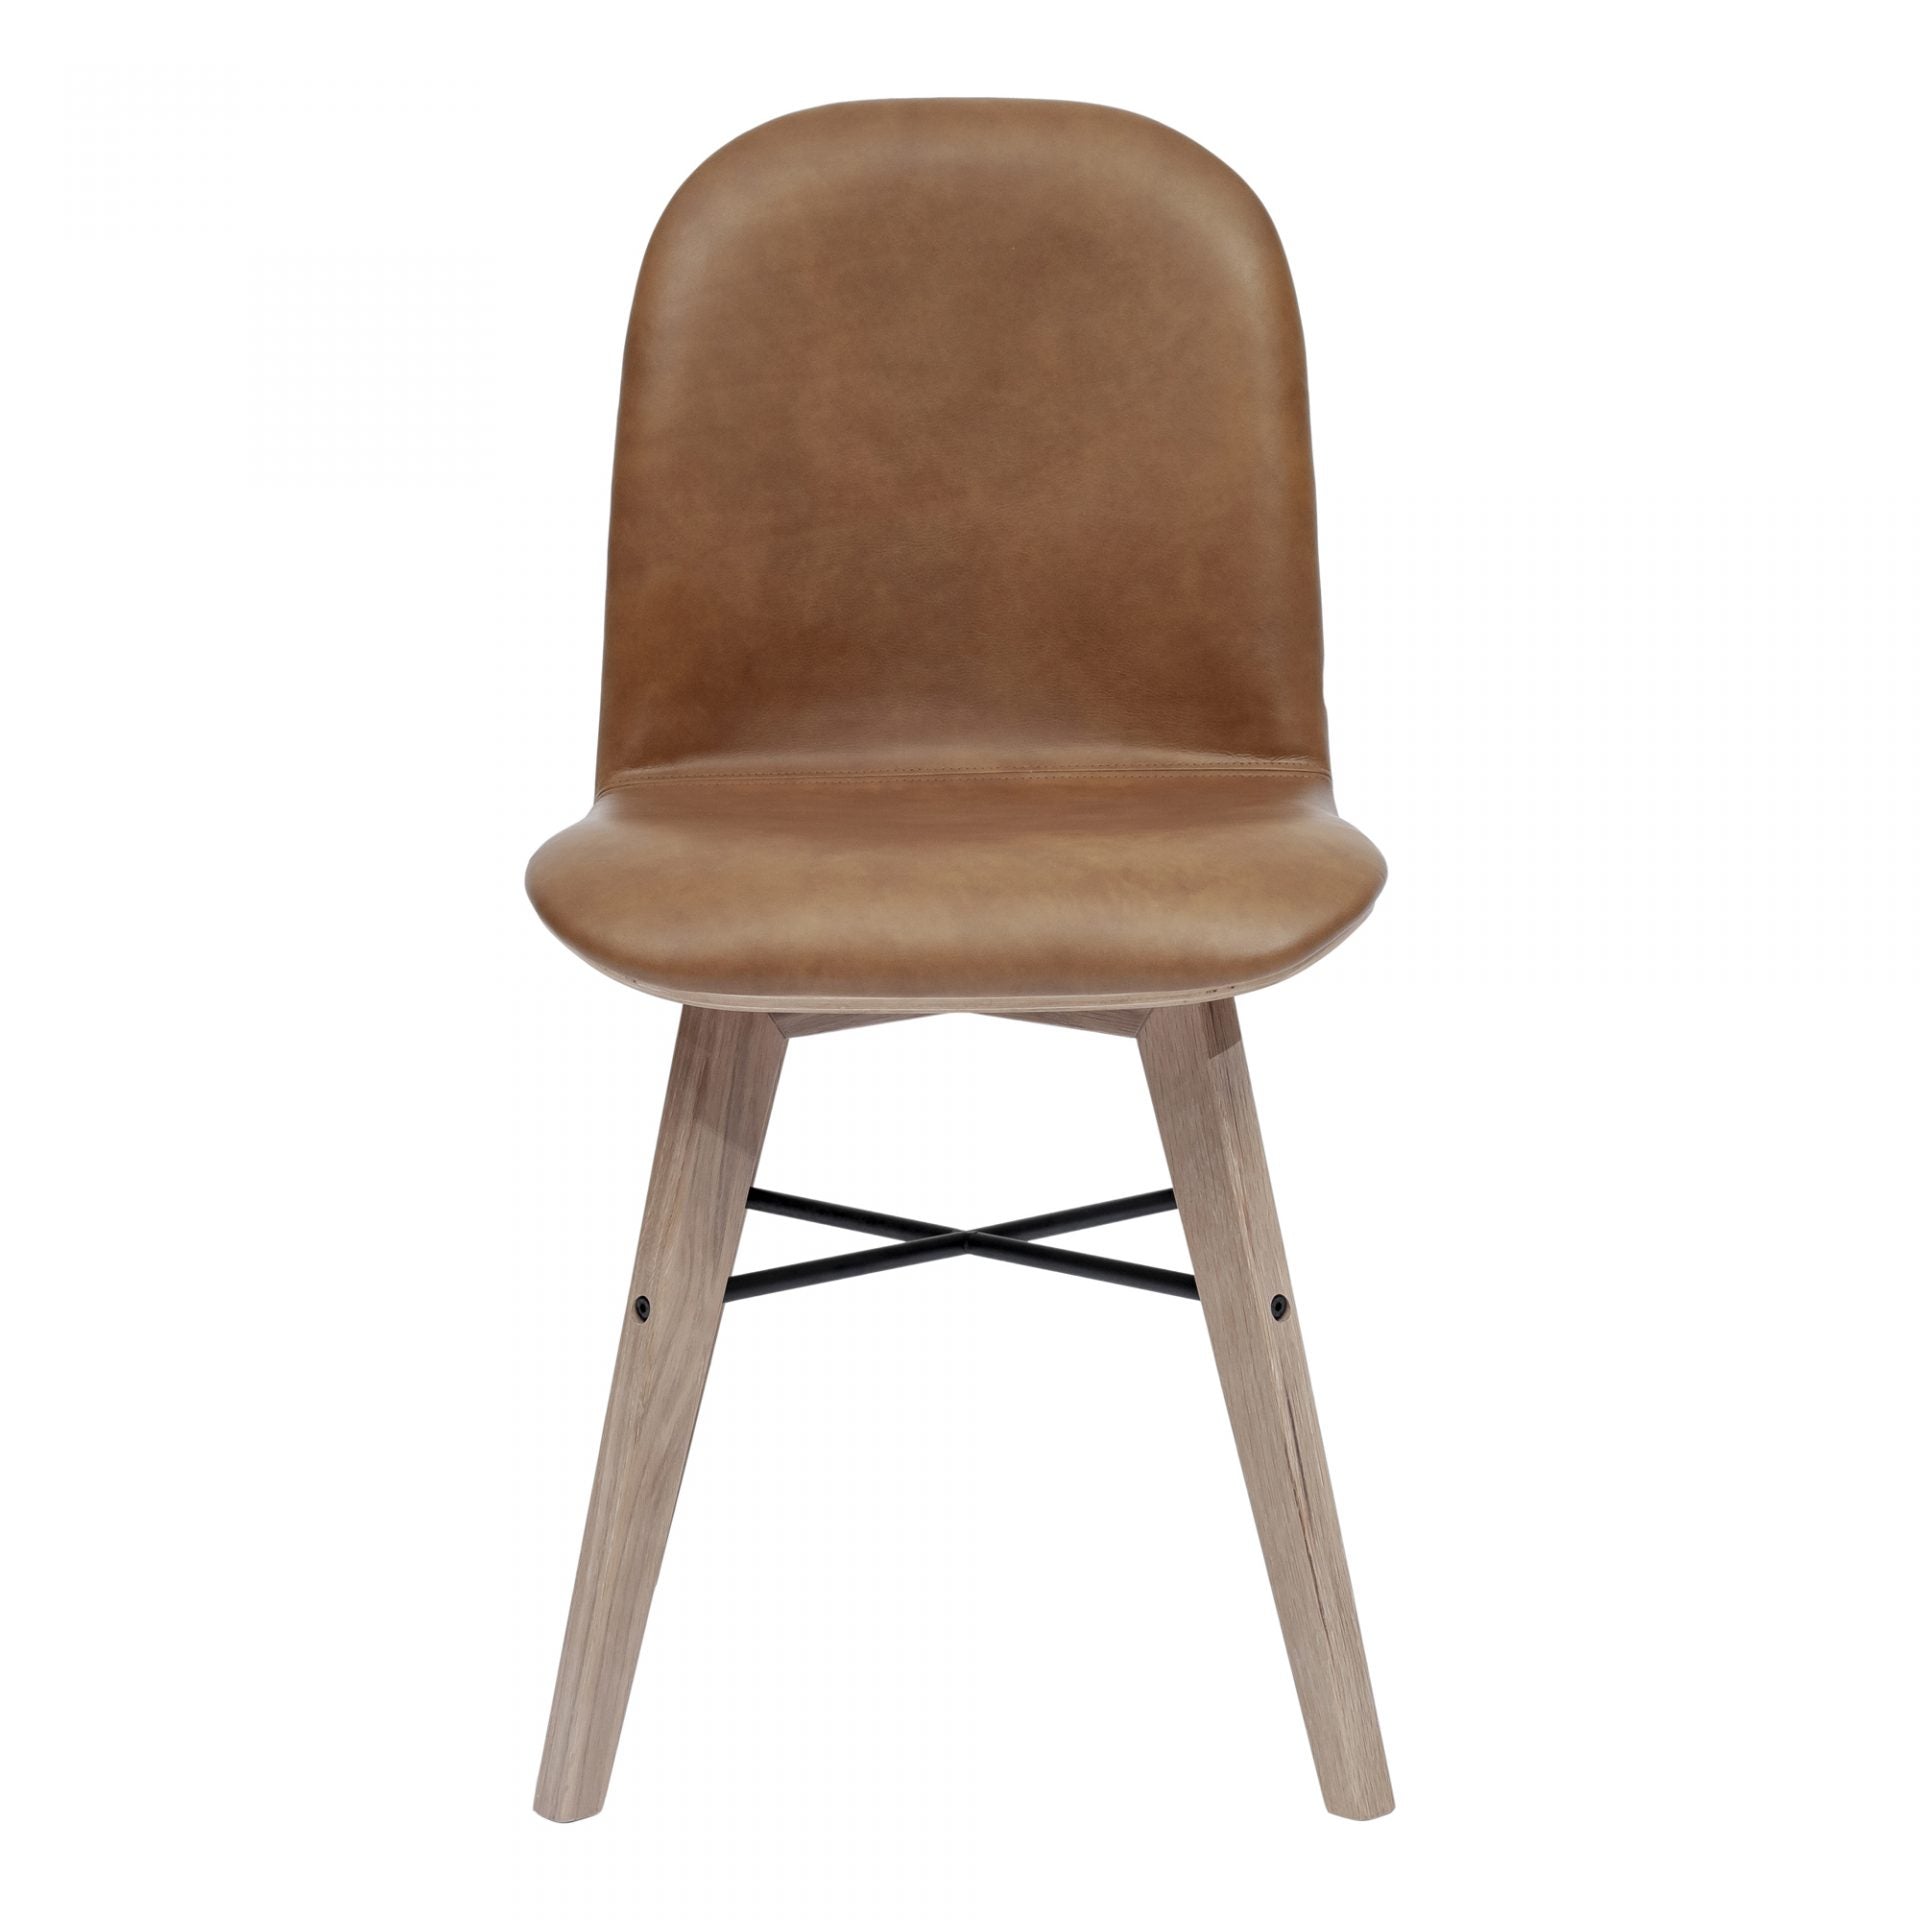 Napoli Dining Chair